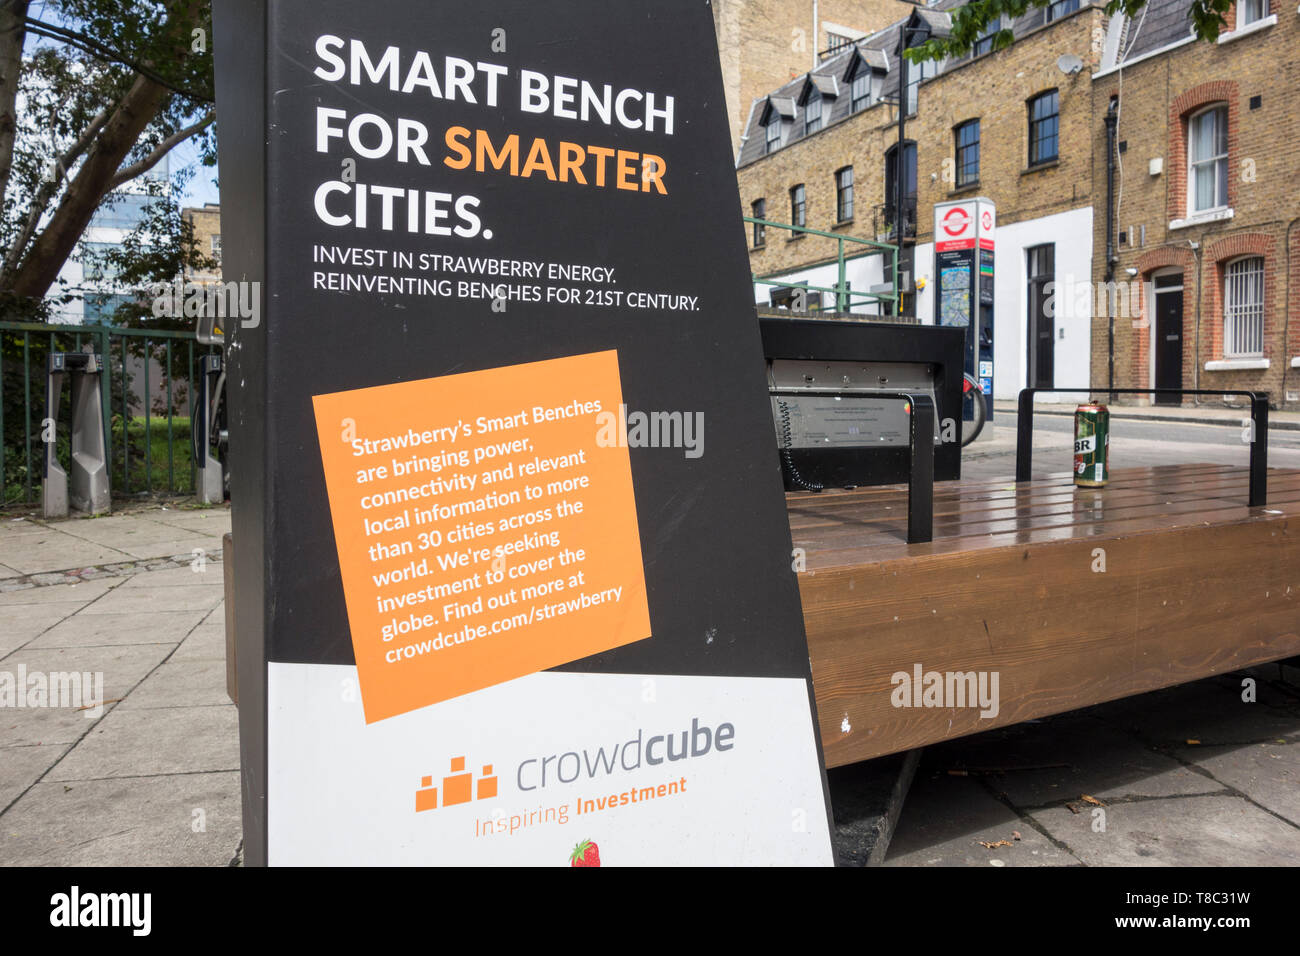 Strawberry Energy's Smart Bench for Smarter Cities on a street in Southwark, London, UK Stock Photo